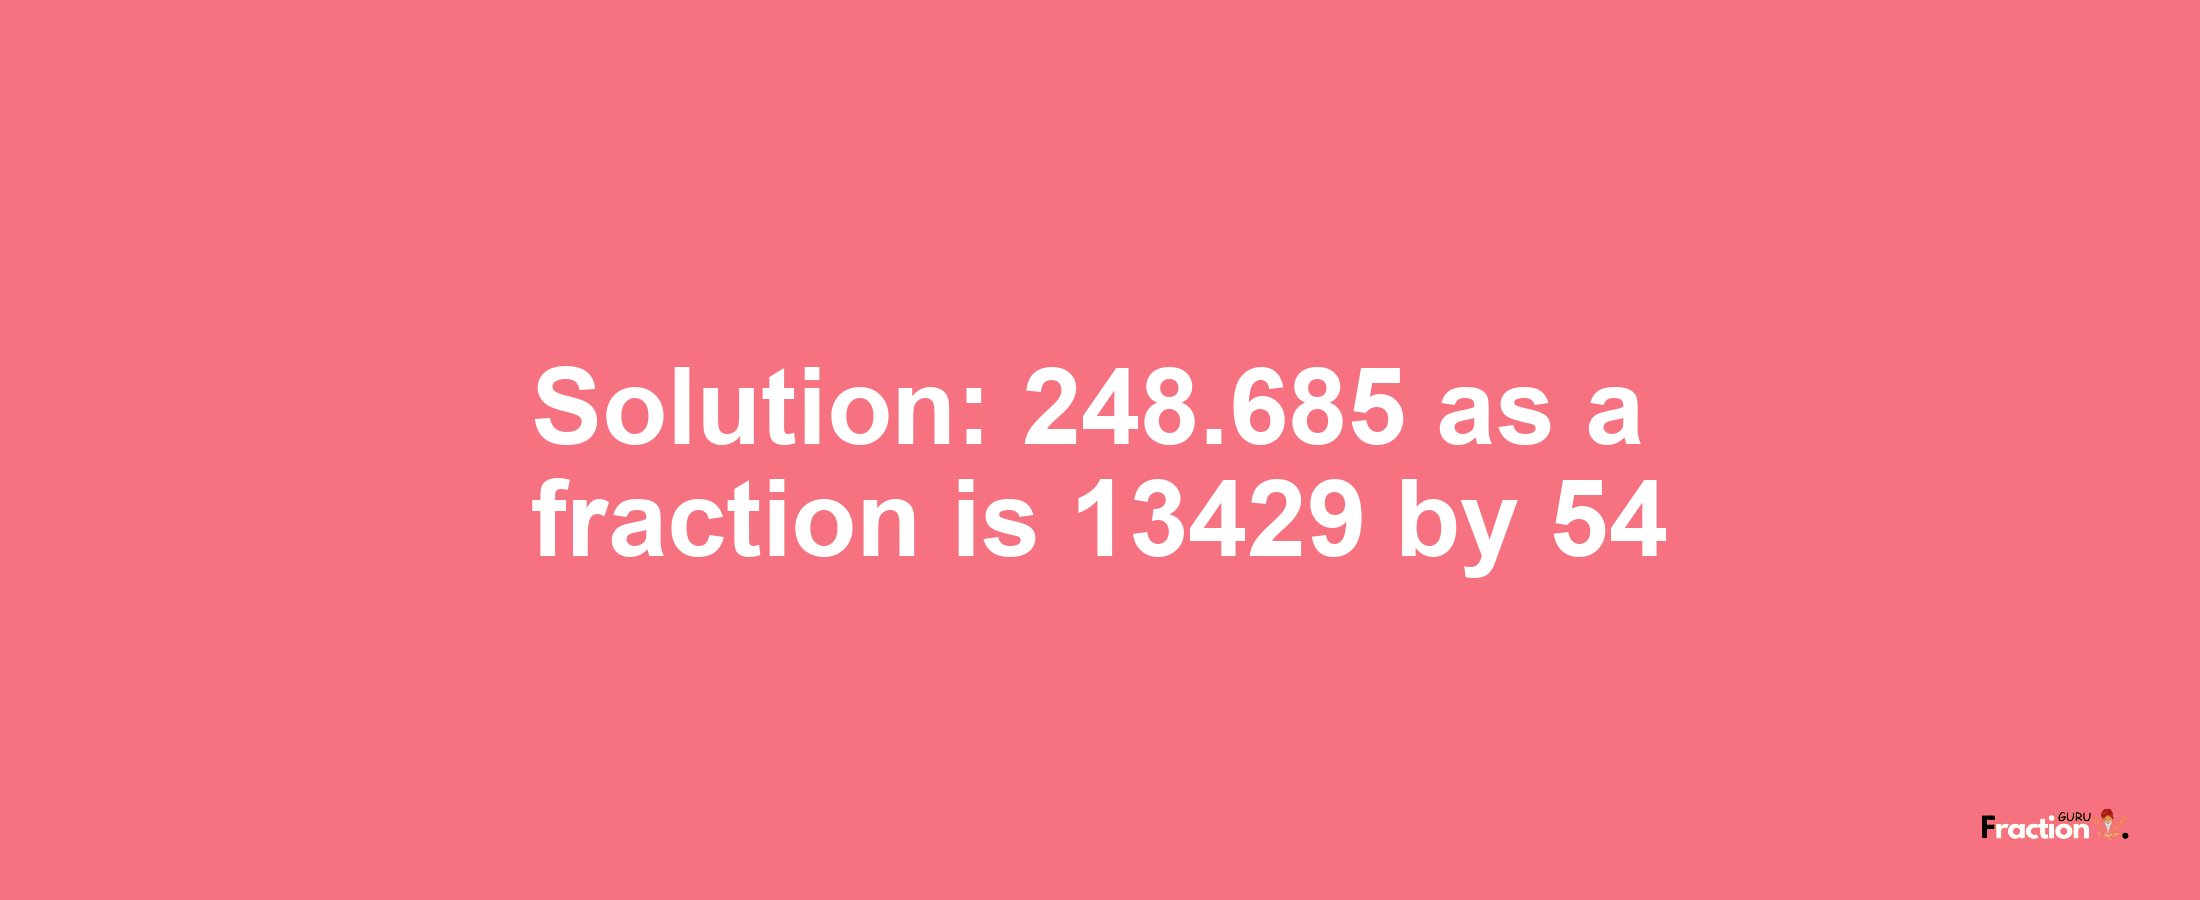 Solution:248.685 as a fraction is 13429/54